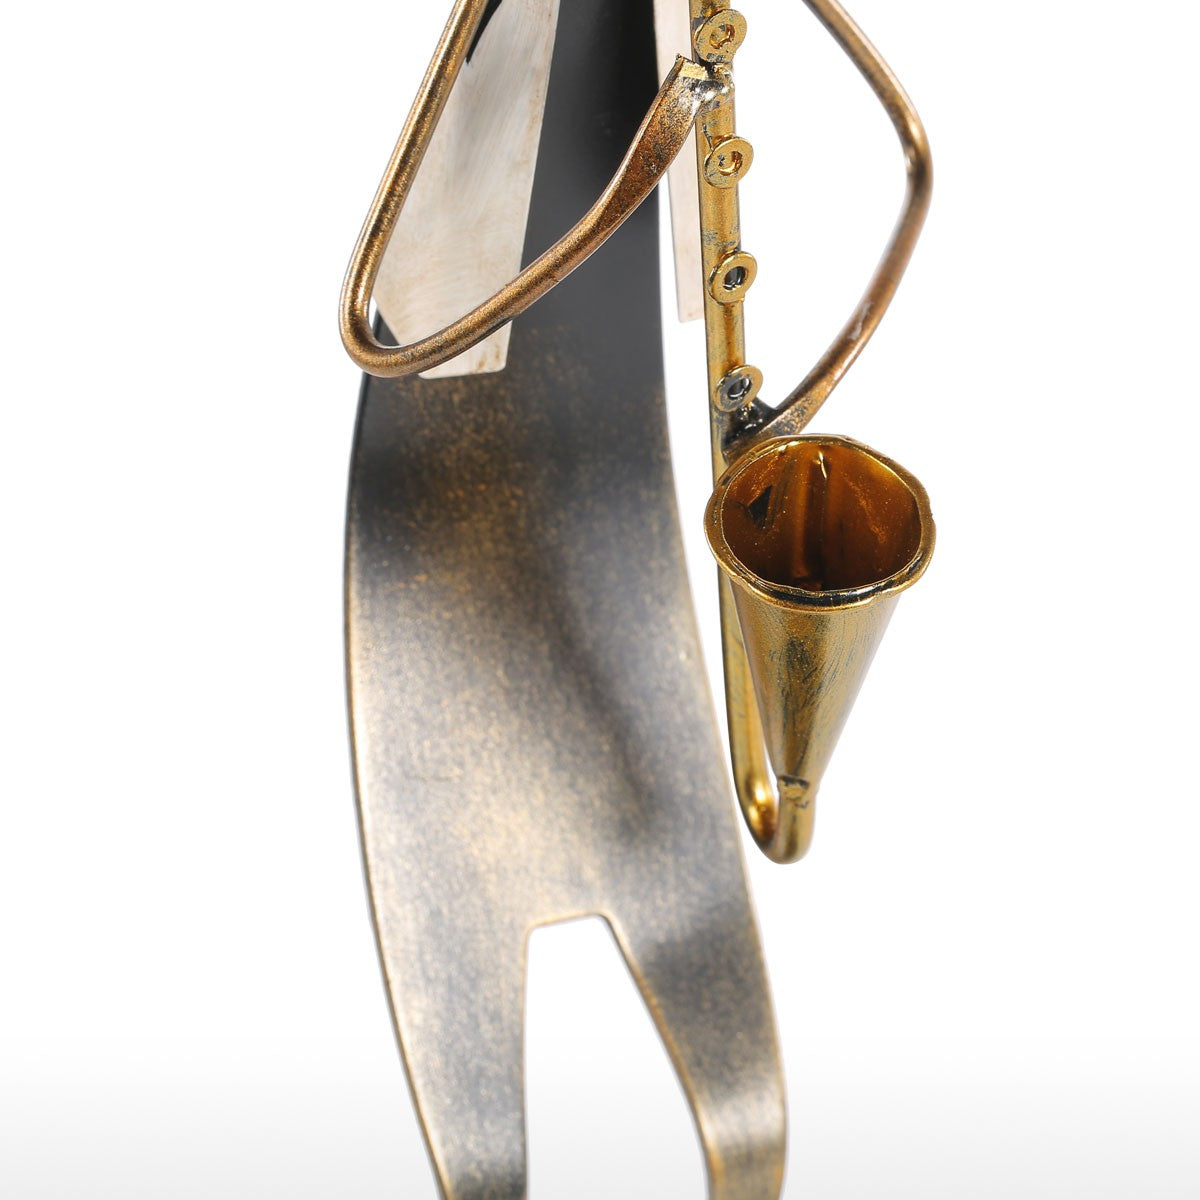 Music Gifts for Students and Best Gifts for Music Lovers with Saxophone